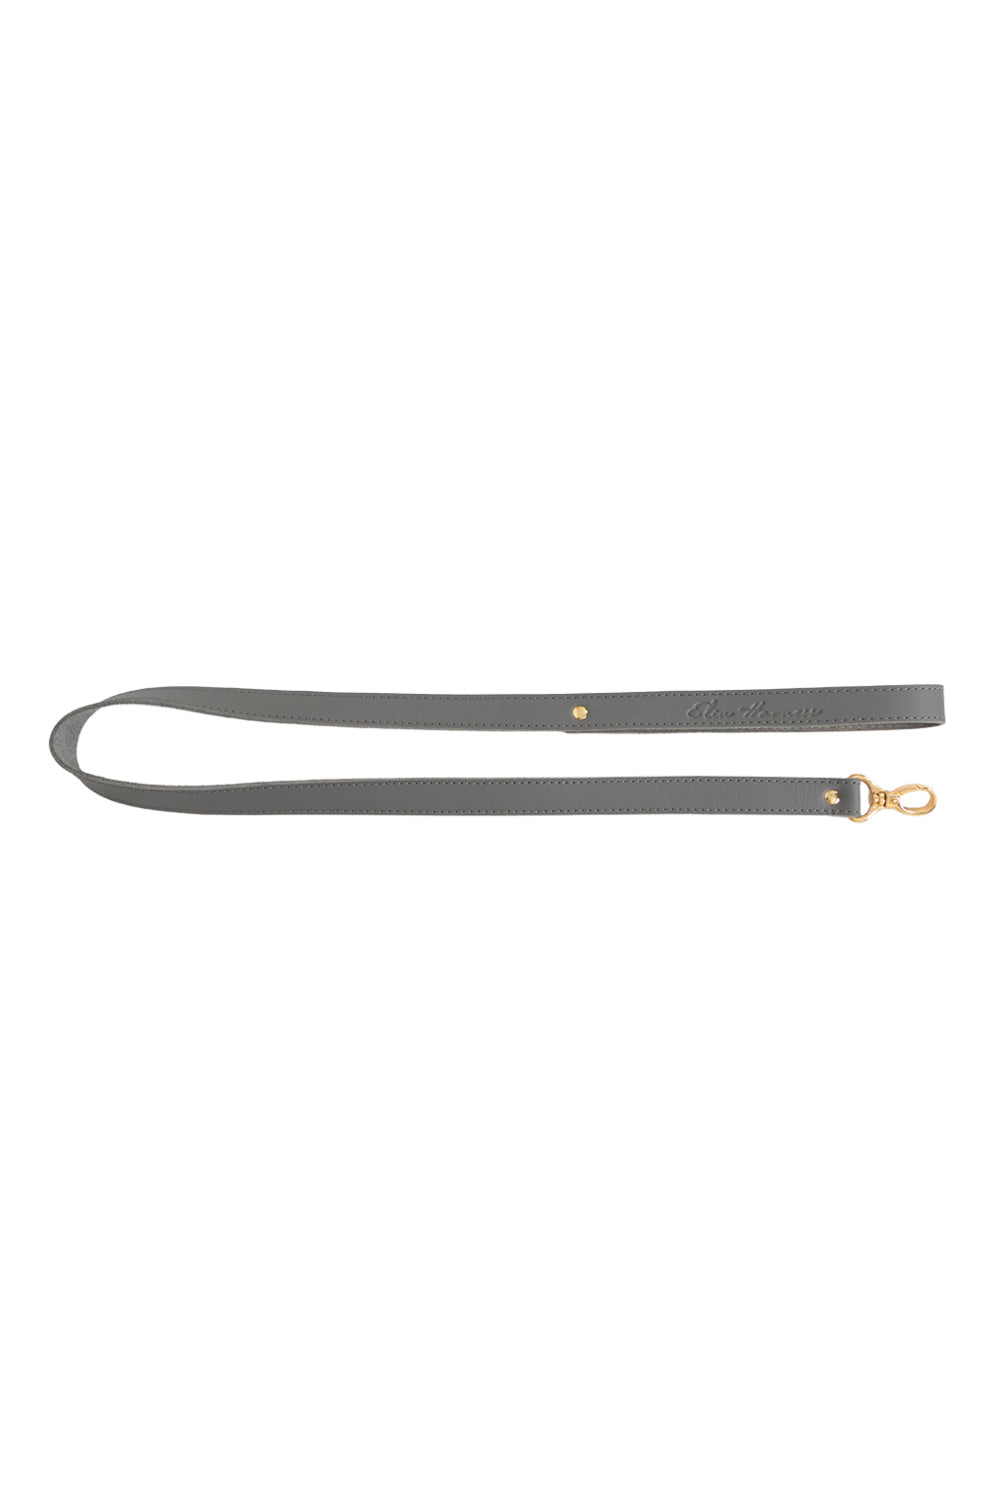 Leather leash. Gray